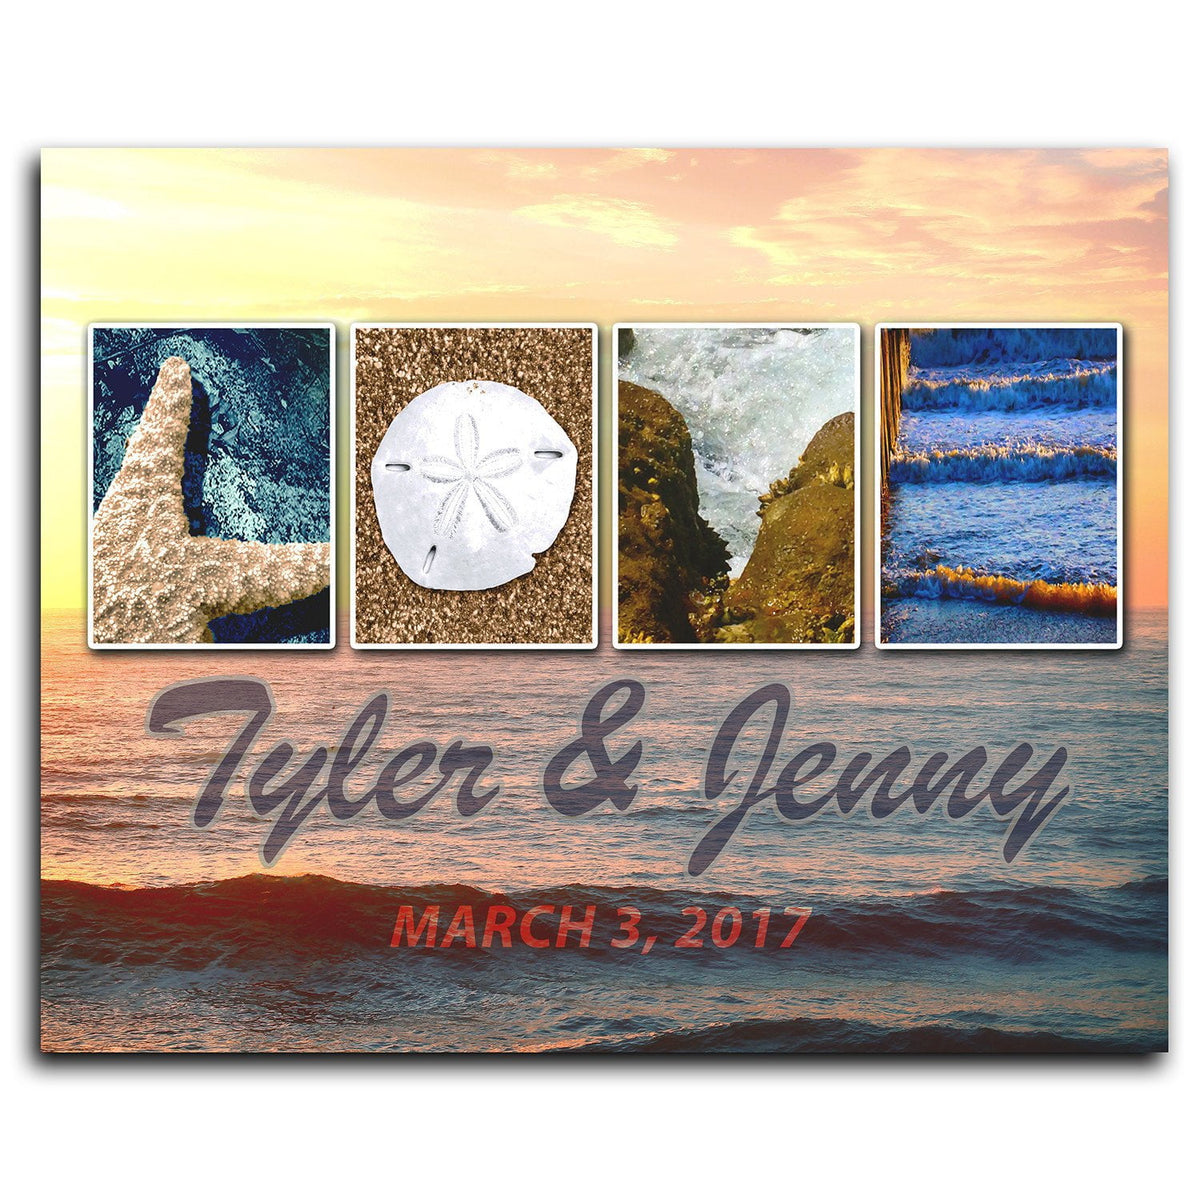 Ocean Beach Wall Decor - Personalized for you from Personal-Prints